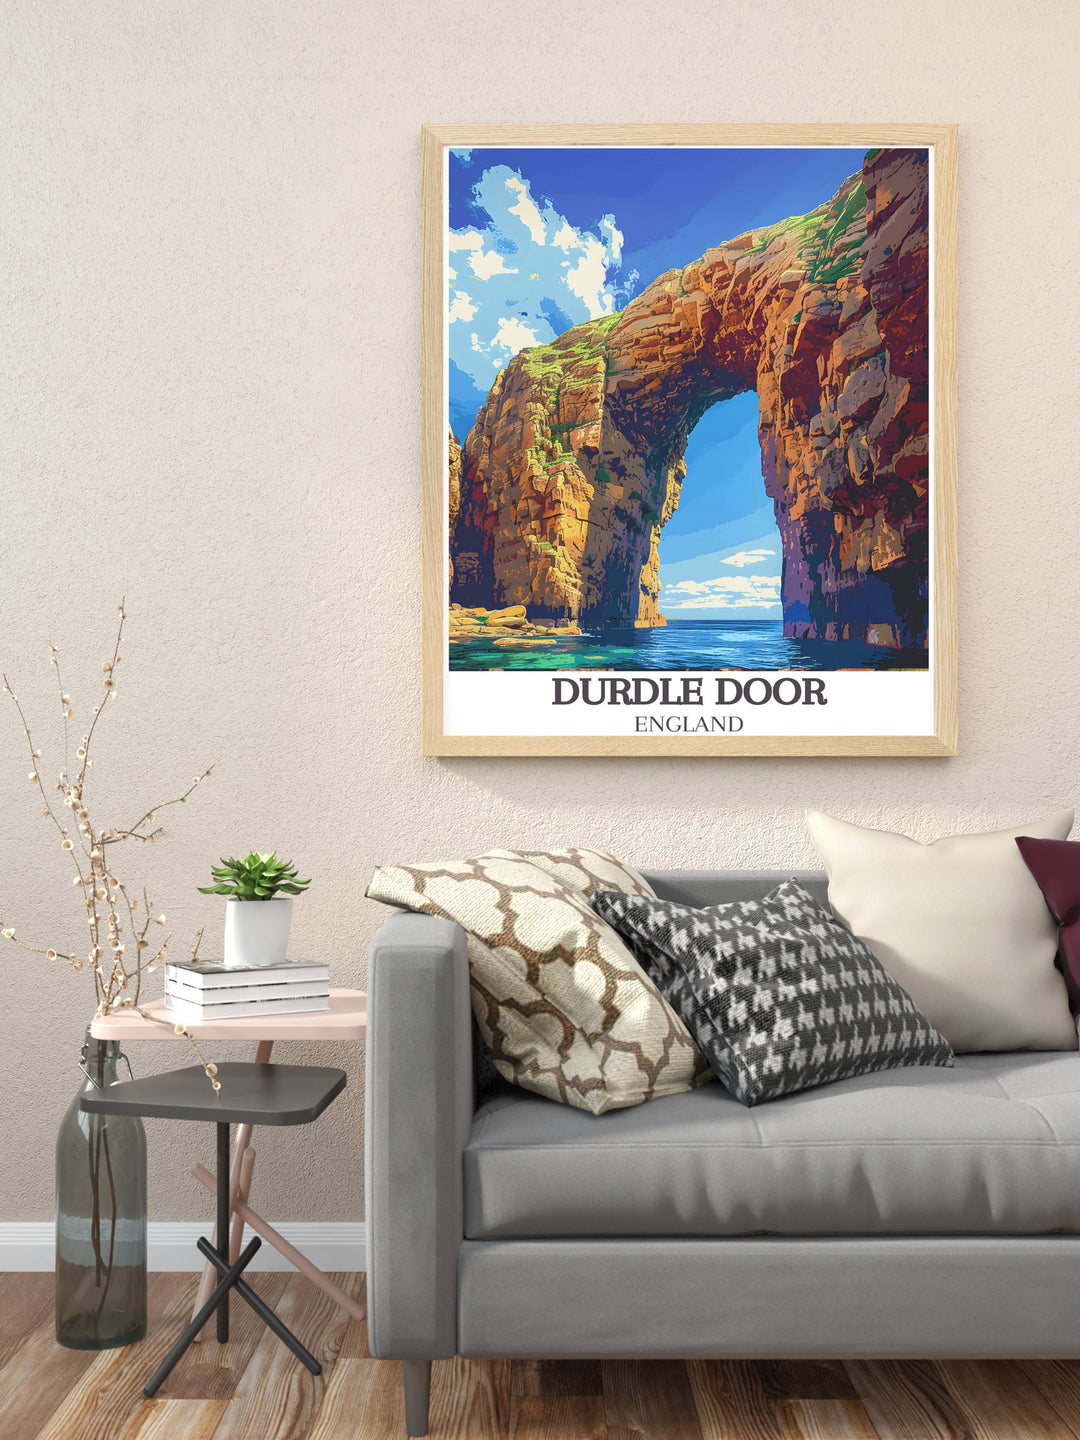 Durdle Door Arch artwork showcasing the breathtaking landscape of Dorset perfect for Dorset travel posters prints and home decor adding a touch of elegance and natural beauty to any room ideal for gifts and enhancing your living space.